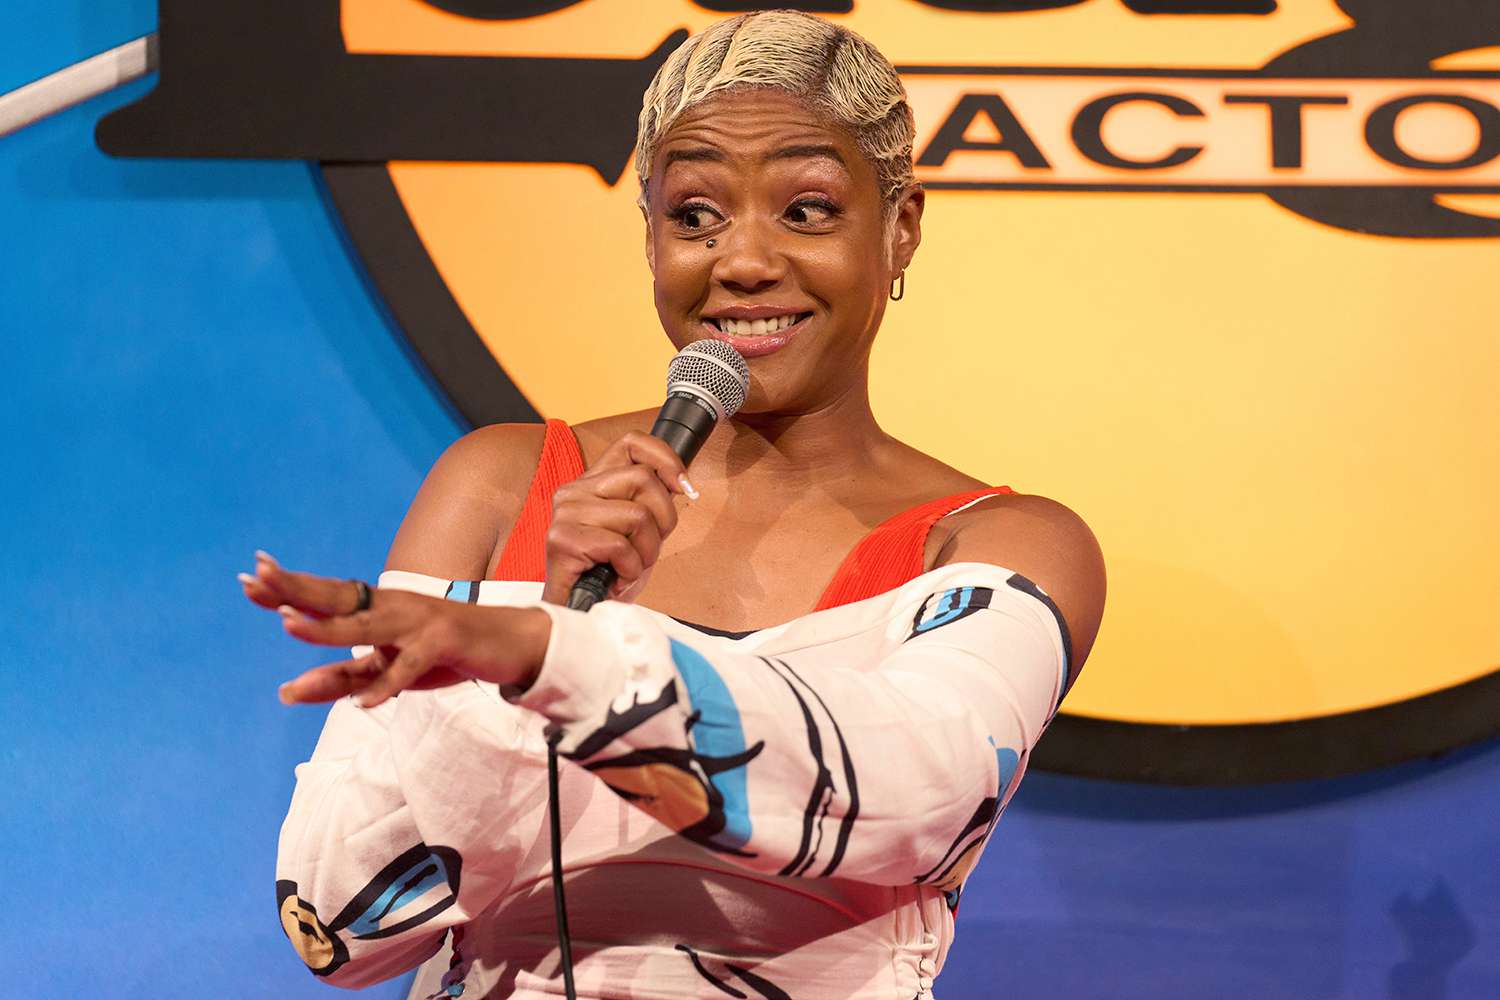 Tiffany Haddish performs during a 'Stand Up for Strikers' comedy event and promotion for her new film 'Back On The Strip' at The Laugh Factory in Los Angeles, California, USA, 15 August 2023.